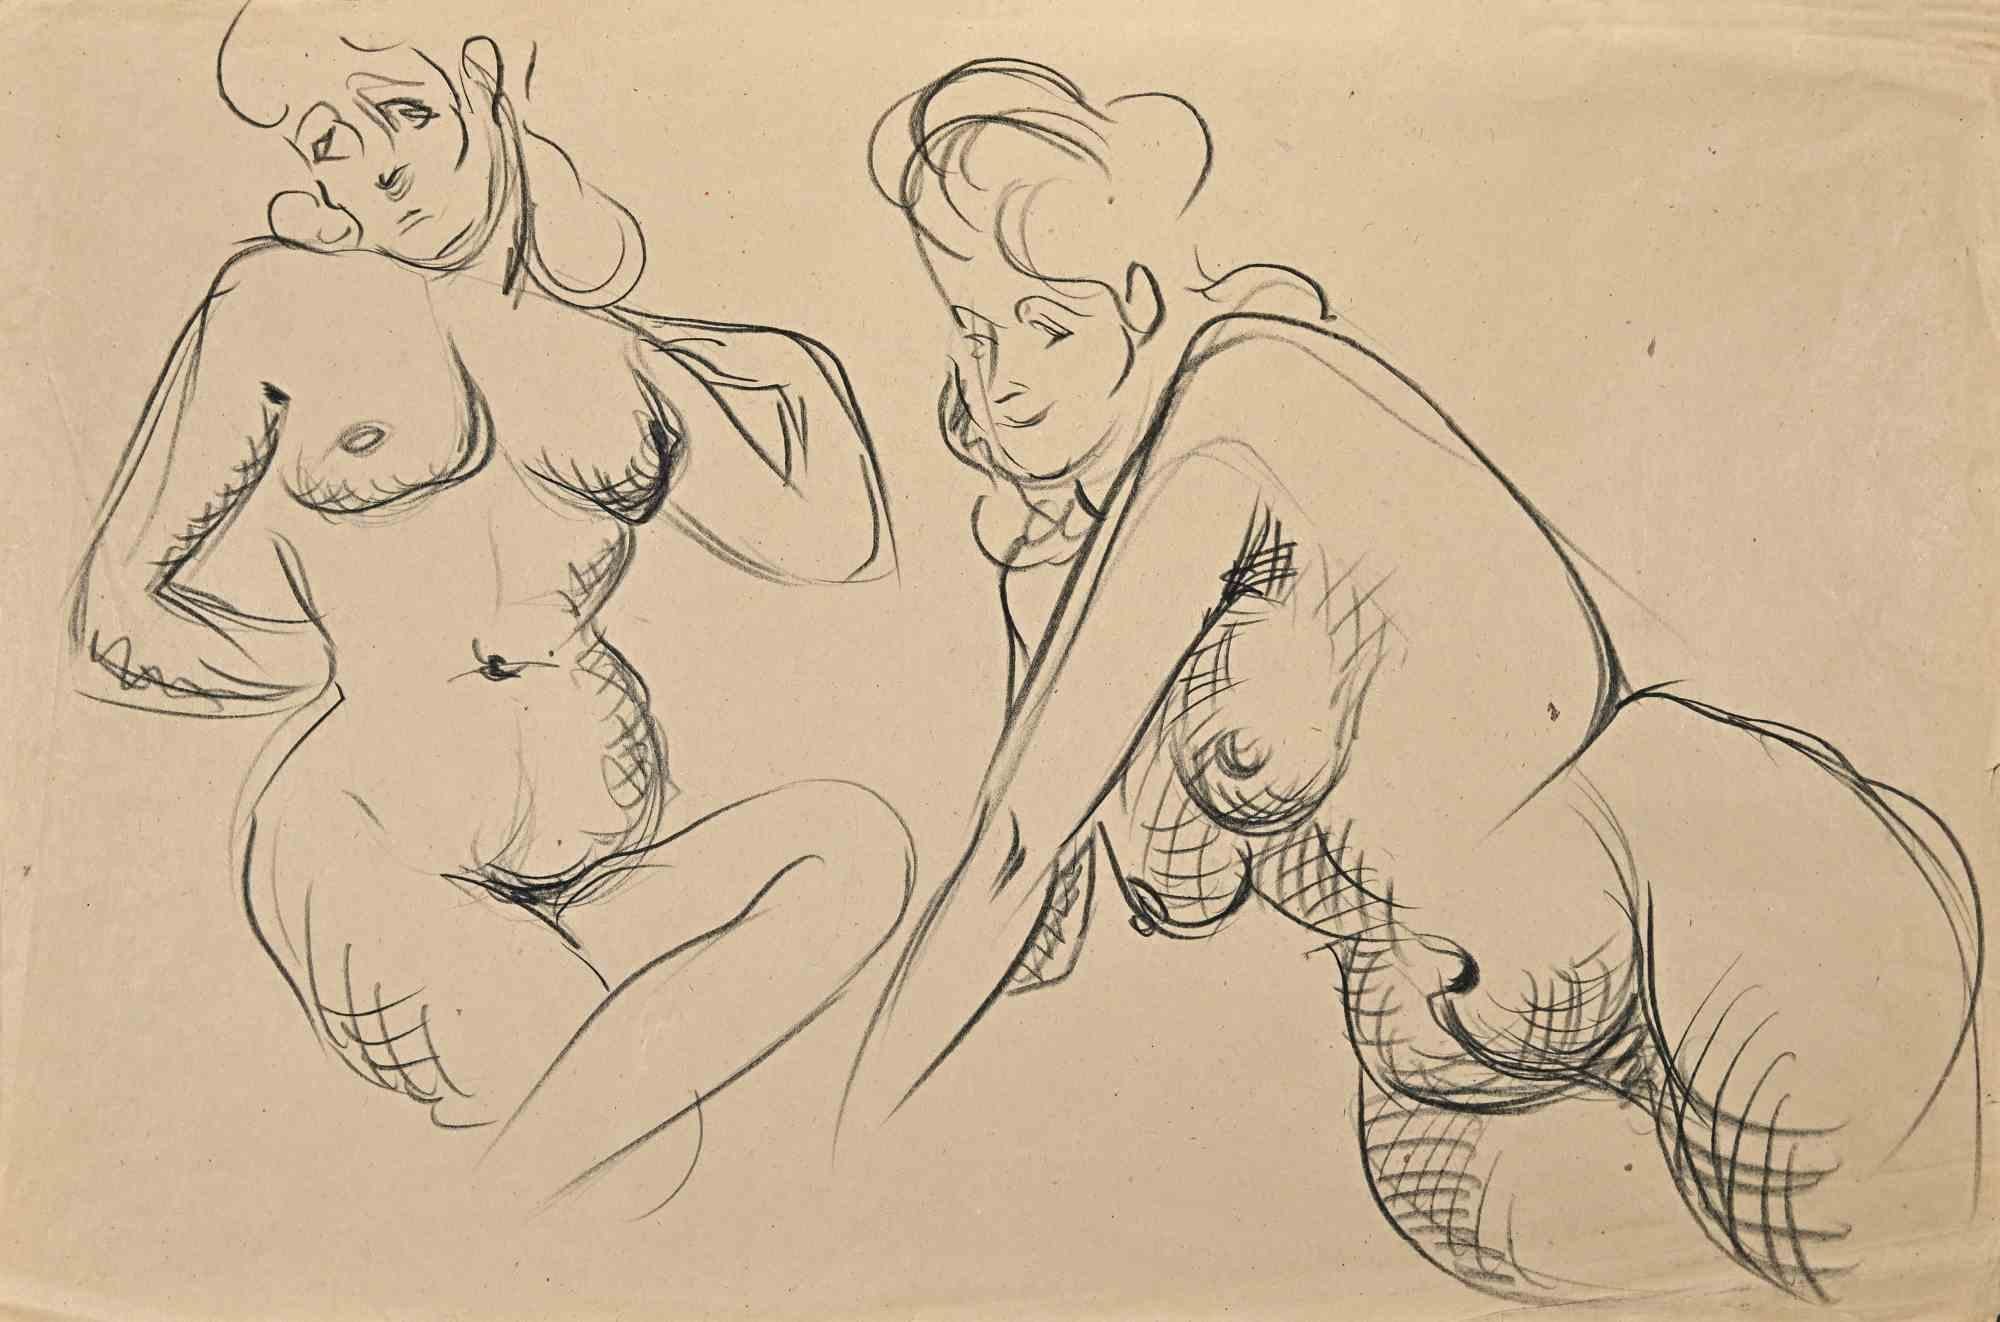 Posing Nude is a charcoal drawing realized by Jean Chapin in the 1950s.

Good condition and aged.

Jean Chapin is a French painter and lithographer born on 21 February 1896 in Paris and died on 24 May 1994 in Jouy-sur-Morin.
He is a member of the